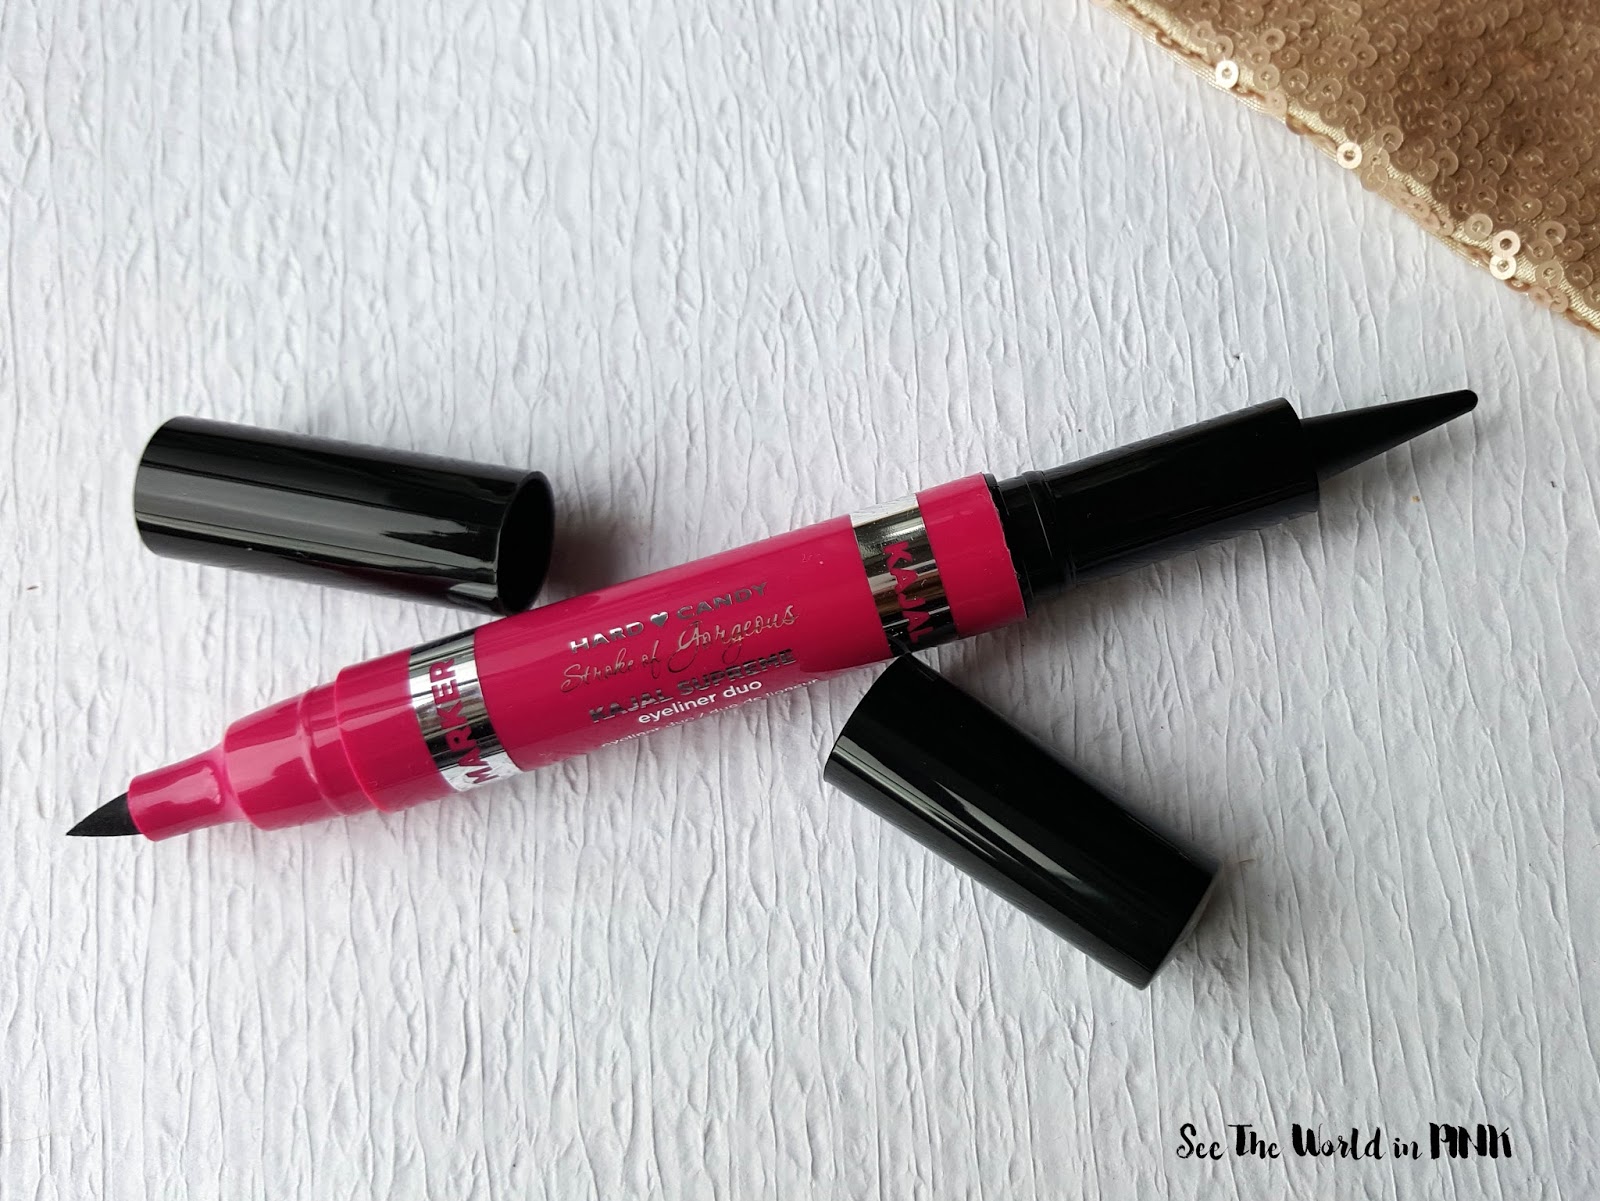 Hard Candy - Spring/Summer Makeup Collection Review, Swatches and Makeup Look!